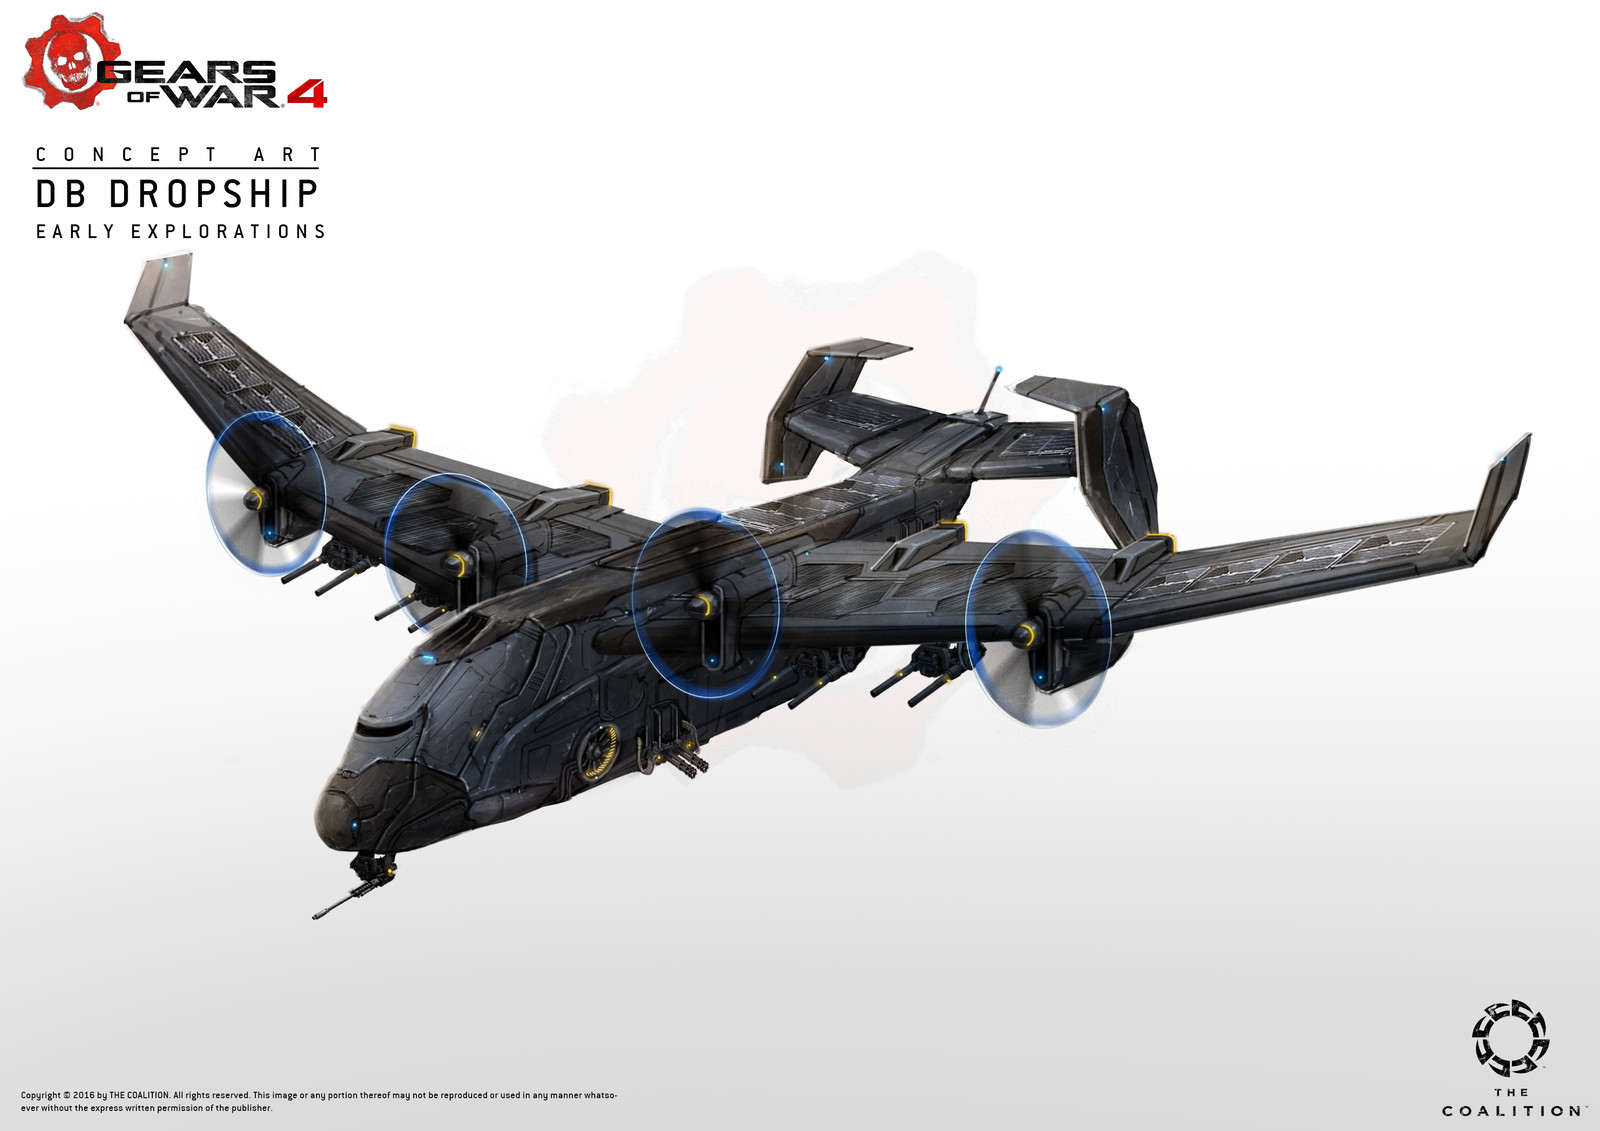 Early explorations for the vulture dropship, i think they went on to model this right away after some internal tweaks